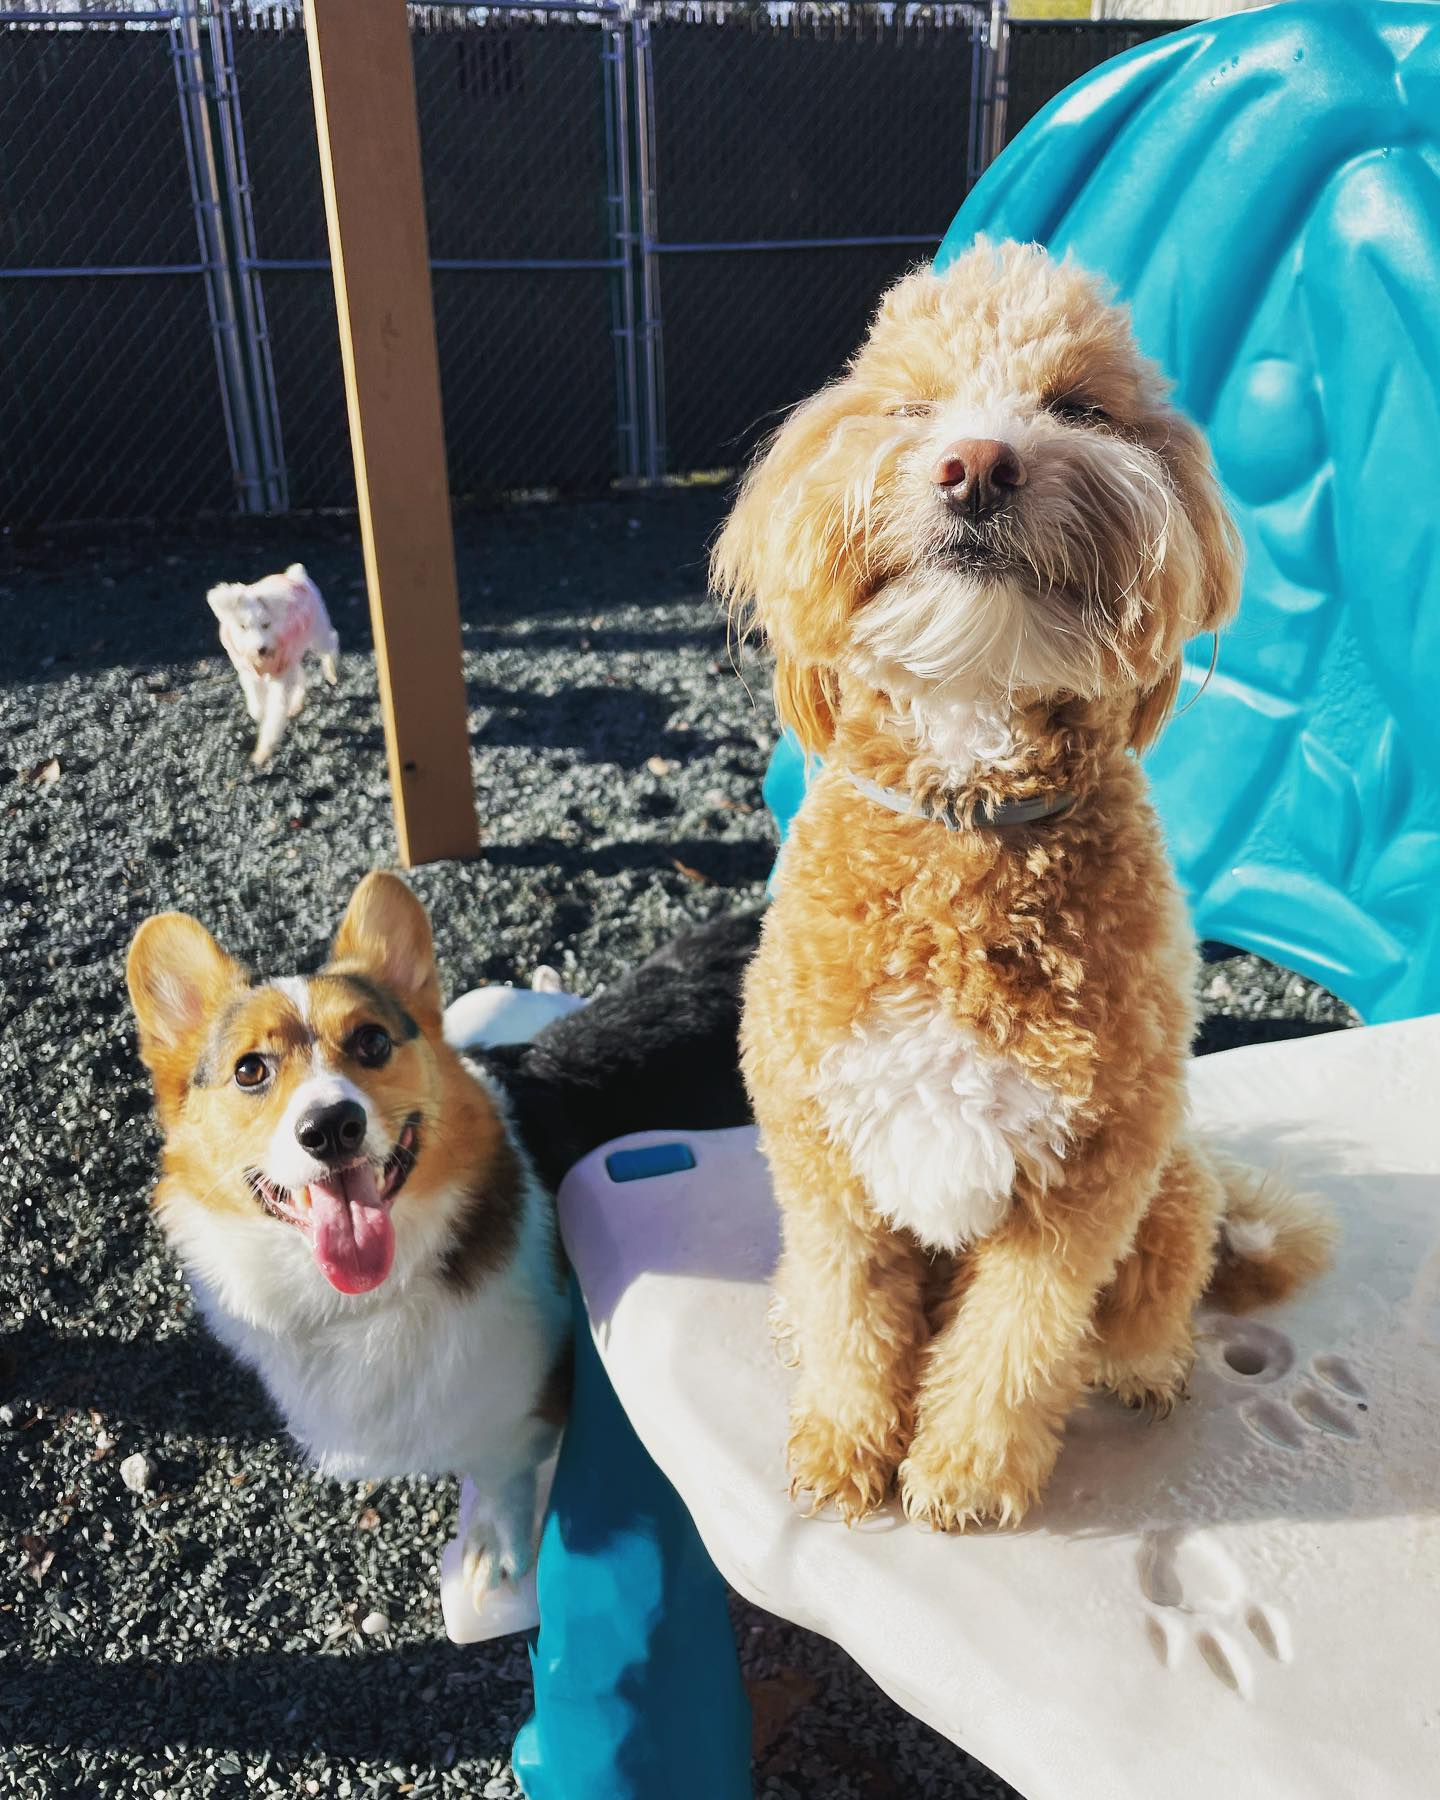 A mini goldendoode and a corgi in daycare looking at the camera